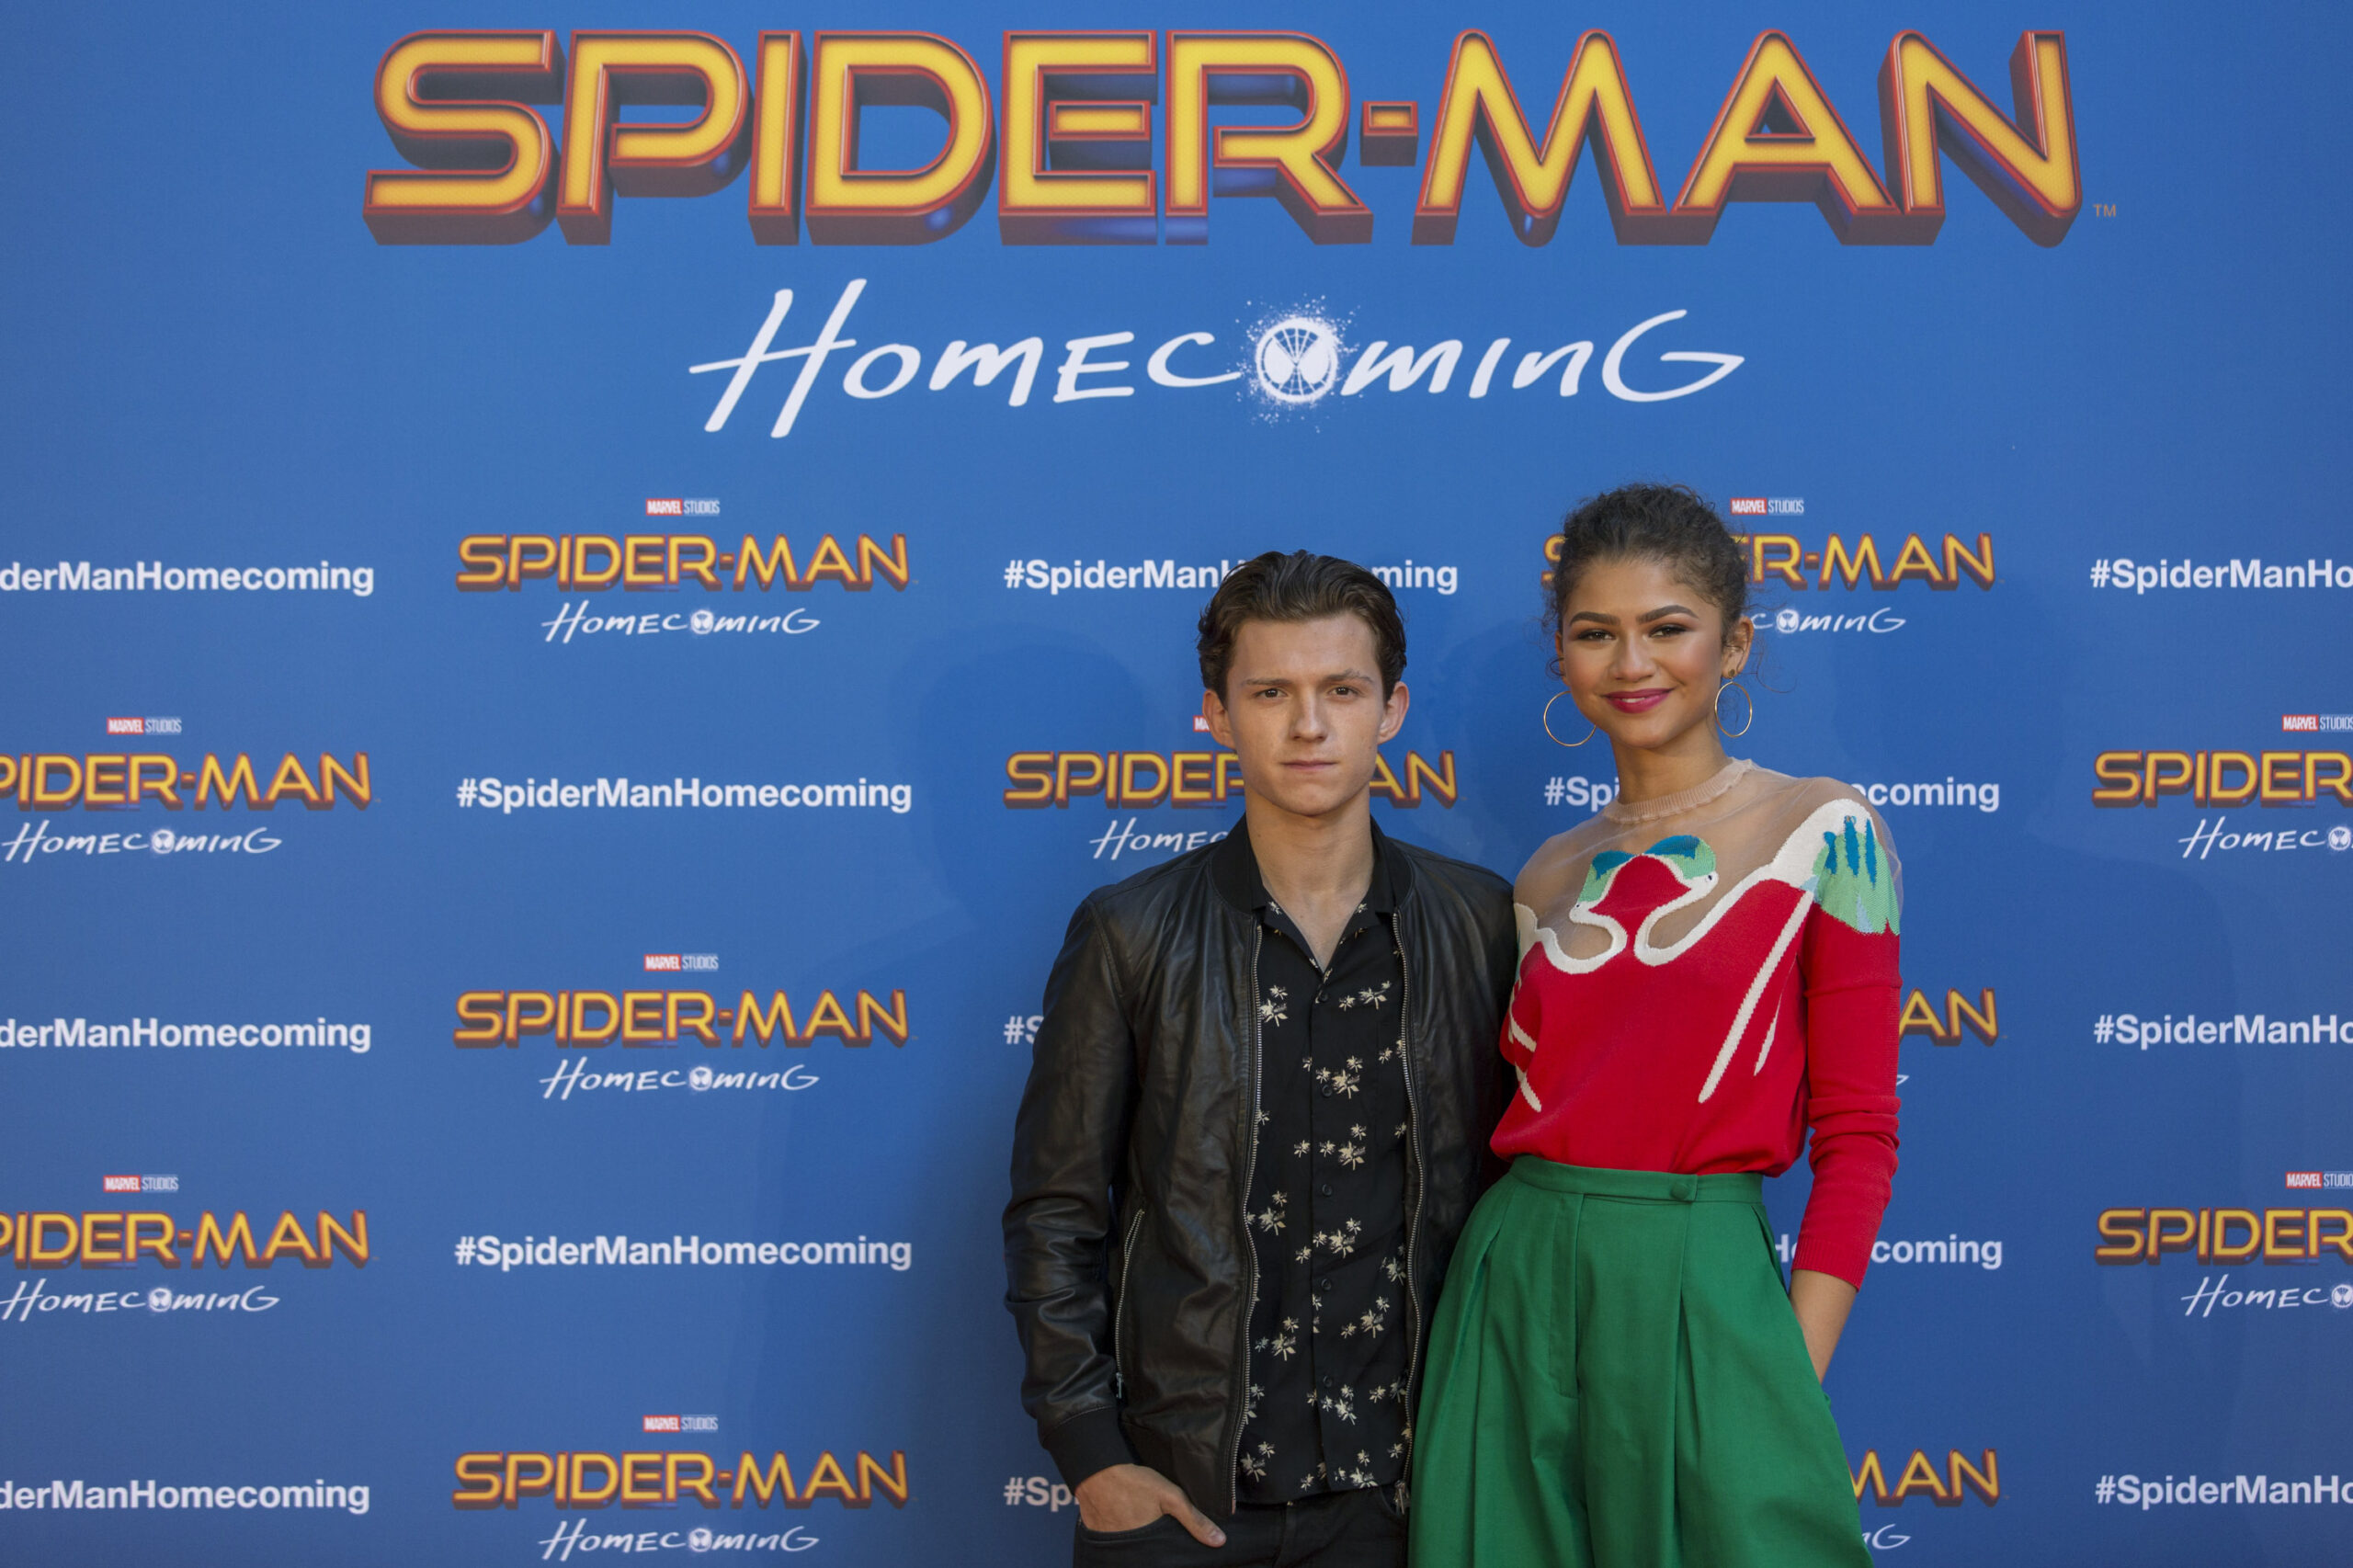 Where It All Began: A Timeline Of Zendaya & Tom Holland’s Love